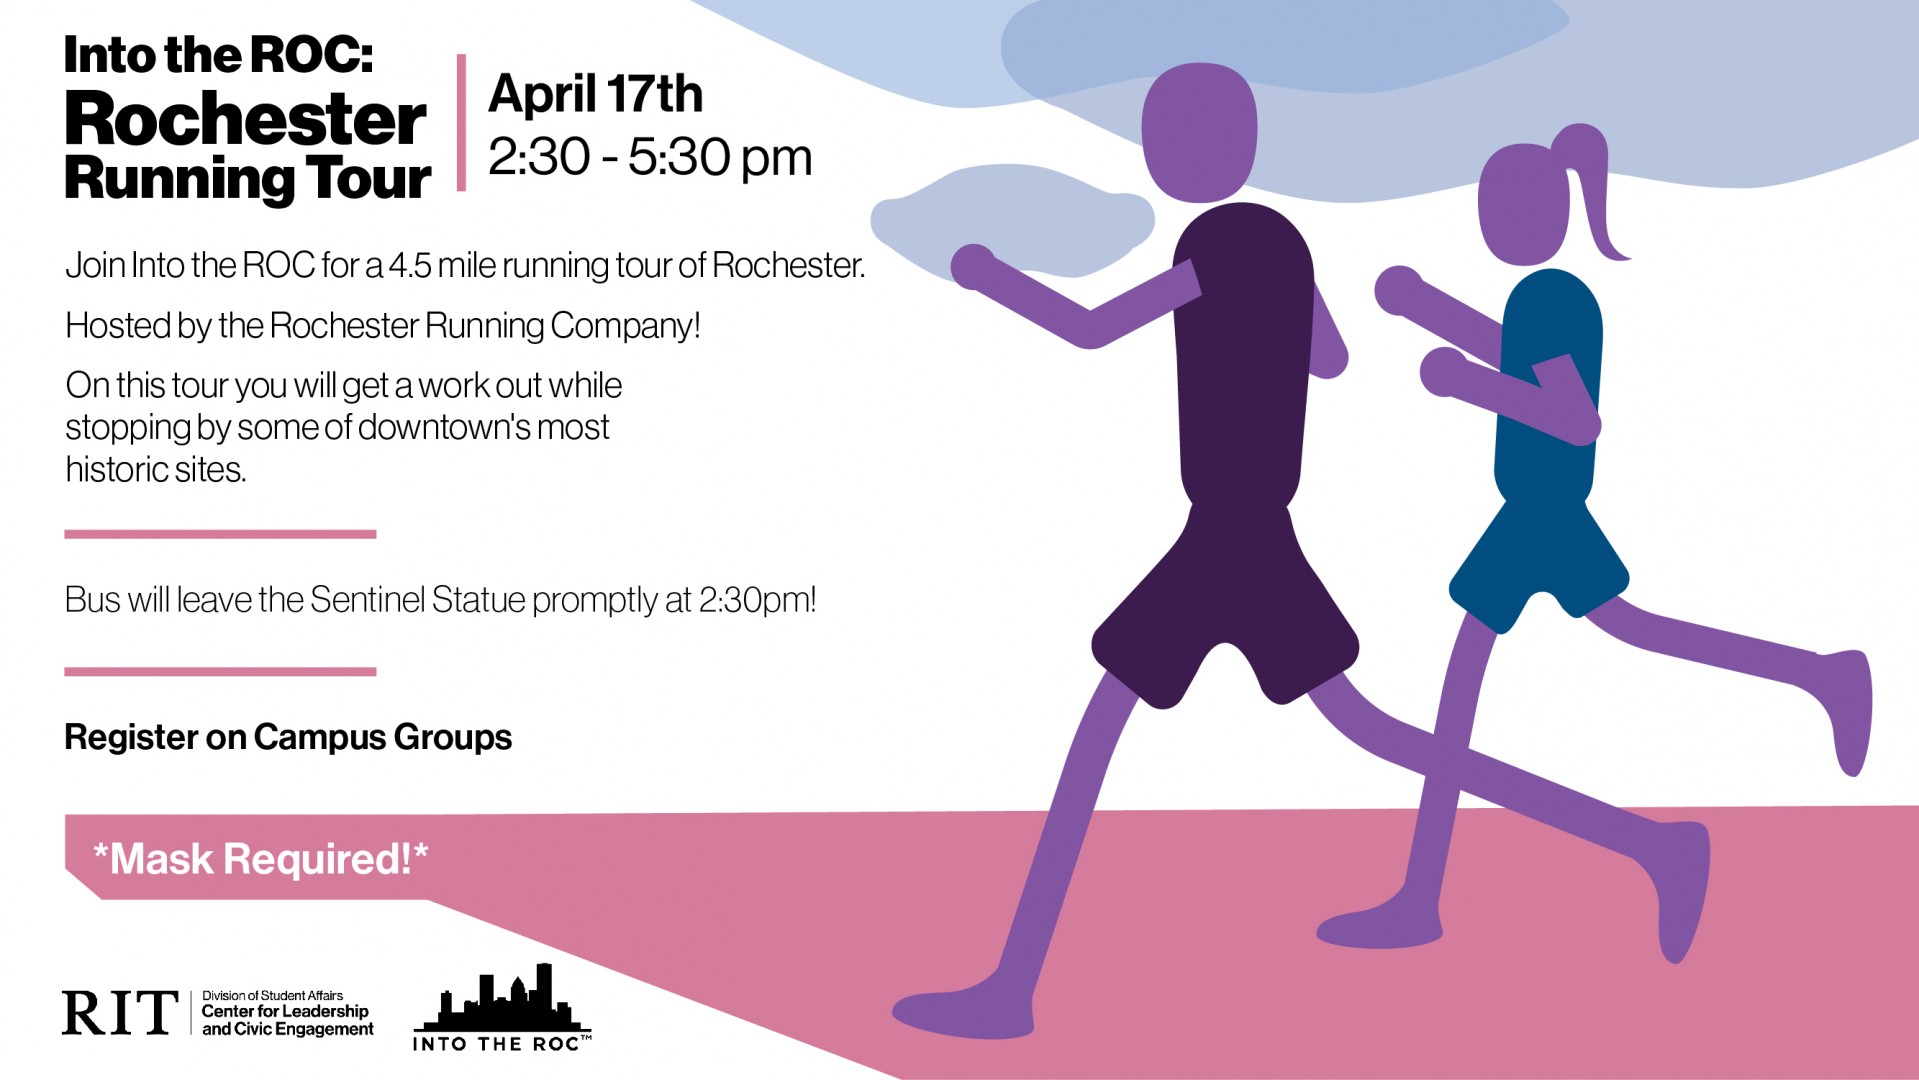 On the right side of the flyer, two people are out for a run. To their left is the information for the event, to take place Saturday, April 17th at 2:30pm.